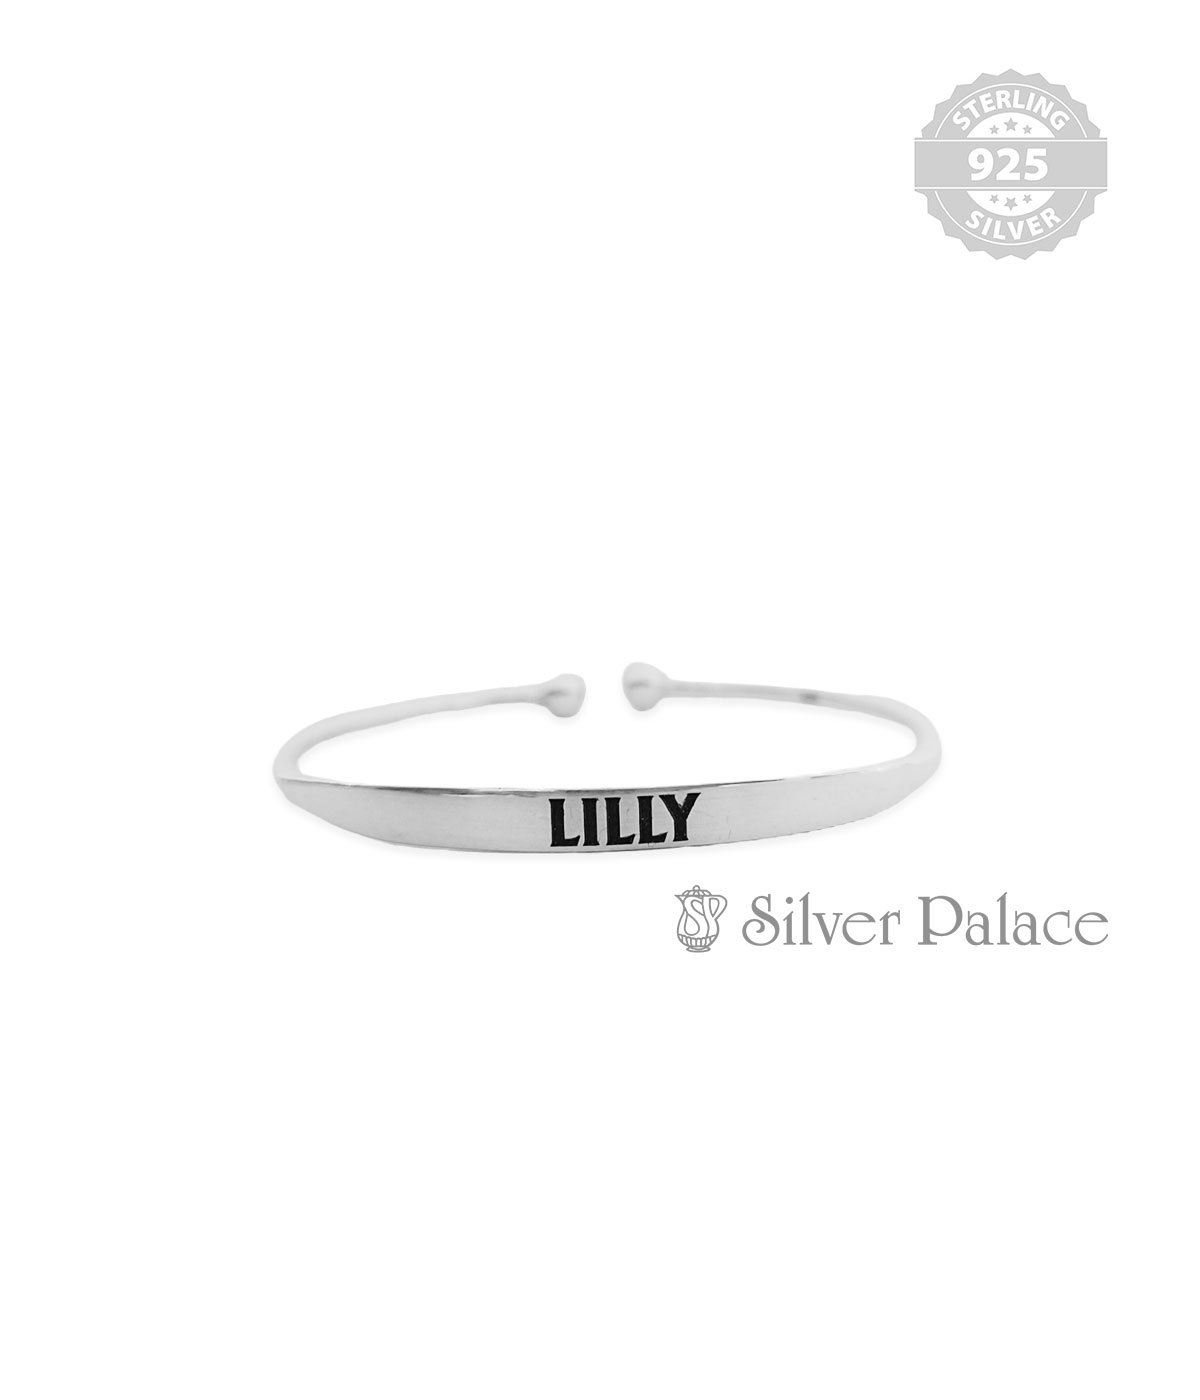 STERLING SILVER LILY NAME ENGRAVED CUSTOMIZED KADA